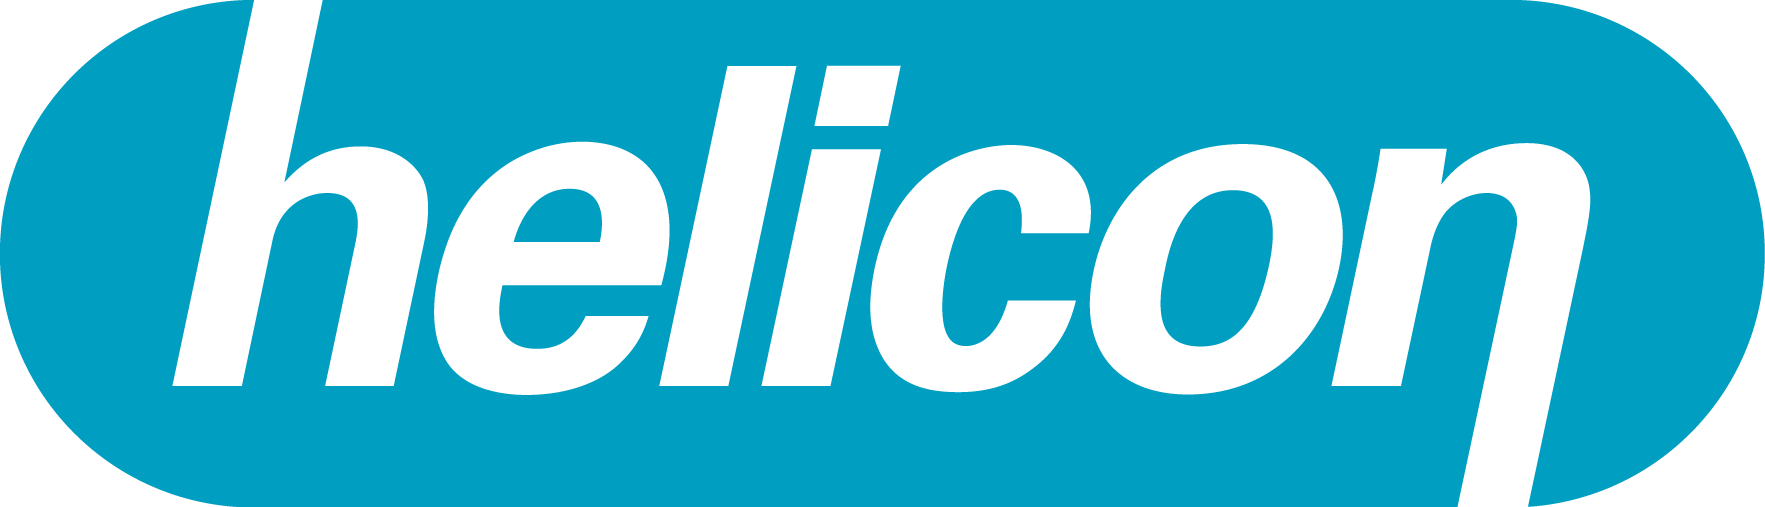 Helicon_logo.png